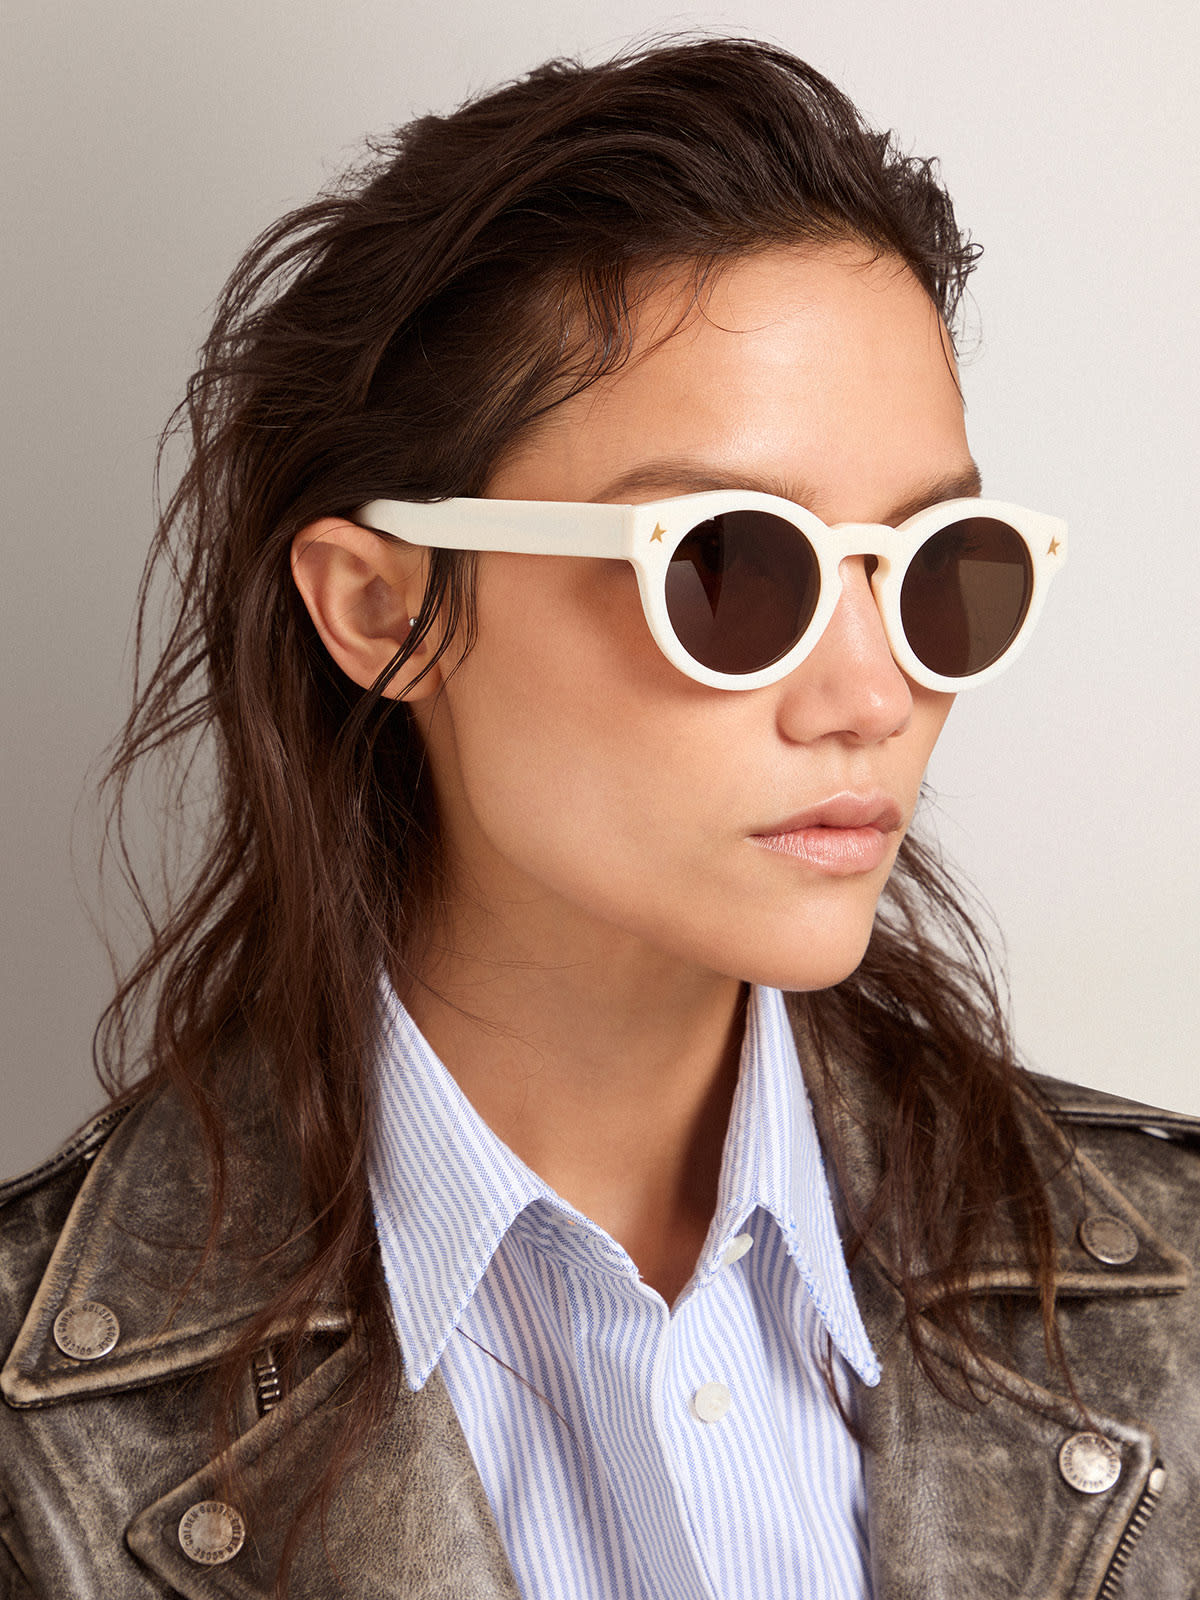 Golden Goose - Sunglasses Panthos model with white frame and gold details in 